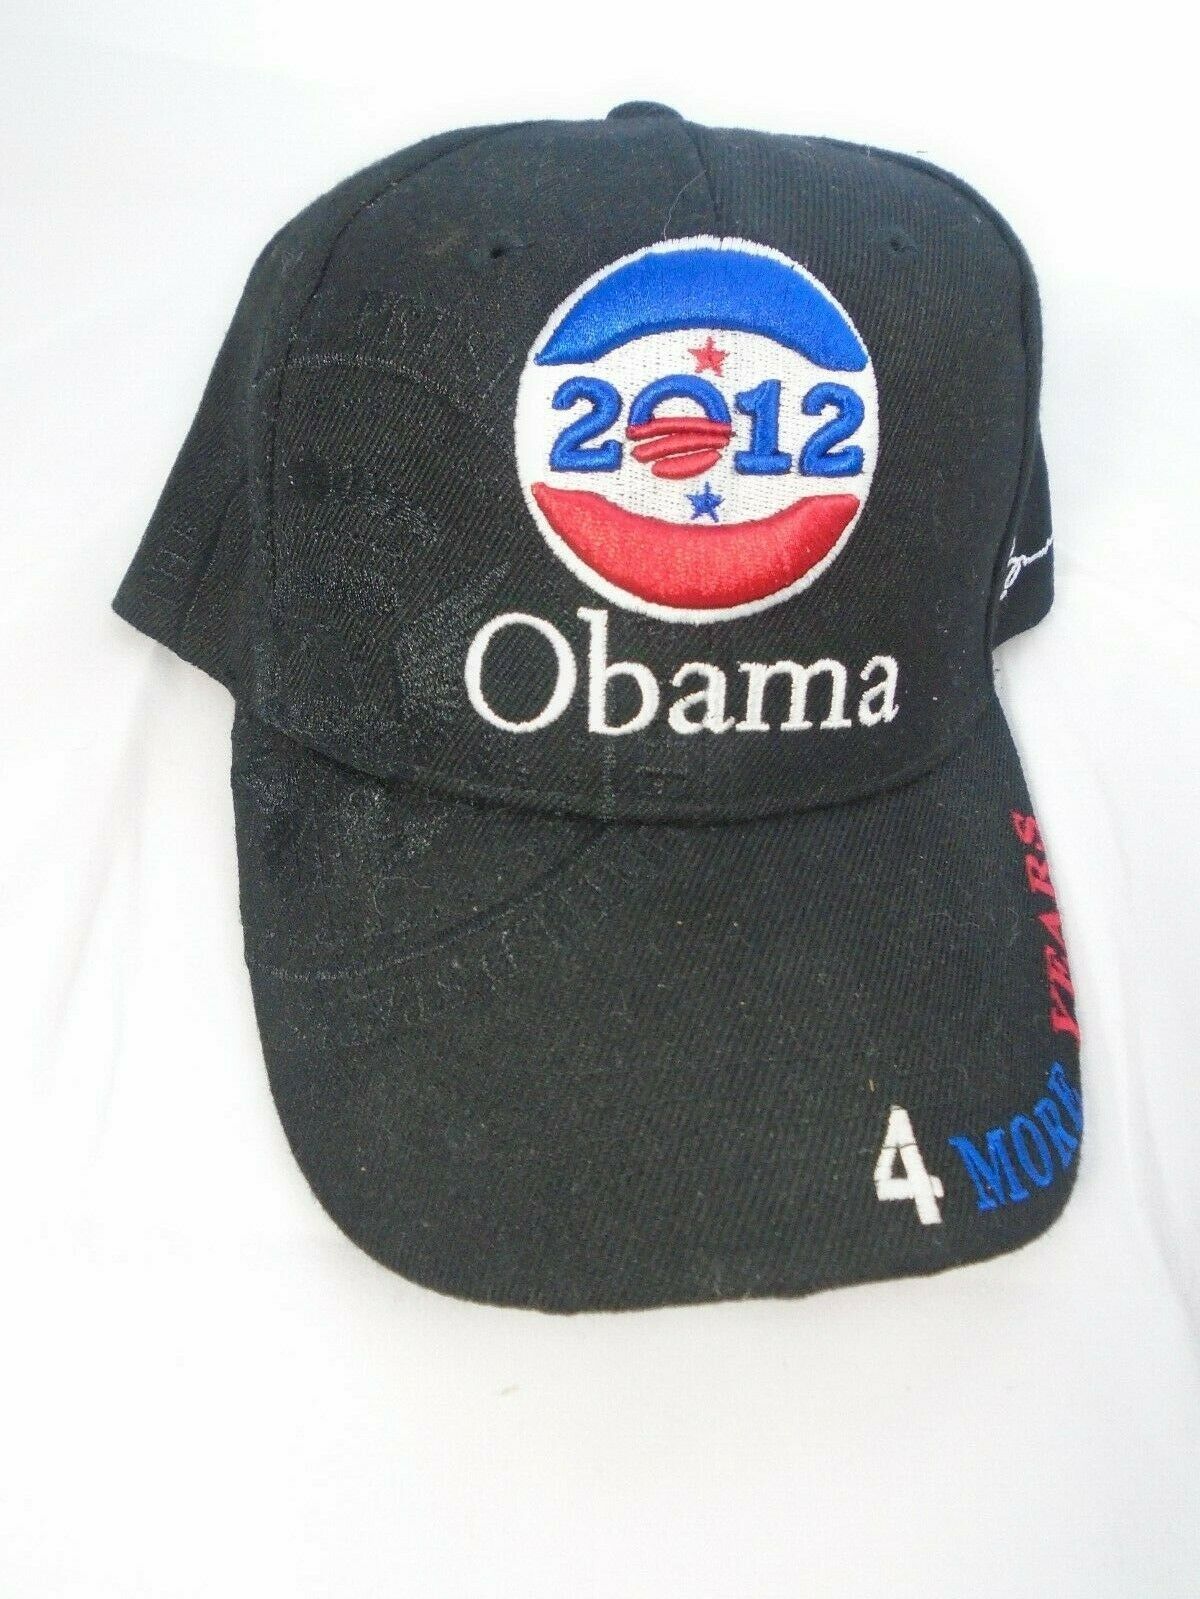 2012 President Obama "4 More Years" Collector's BB Cap Hat w/ Presidential SEAL - $4.90